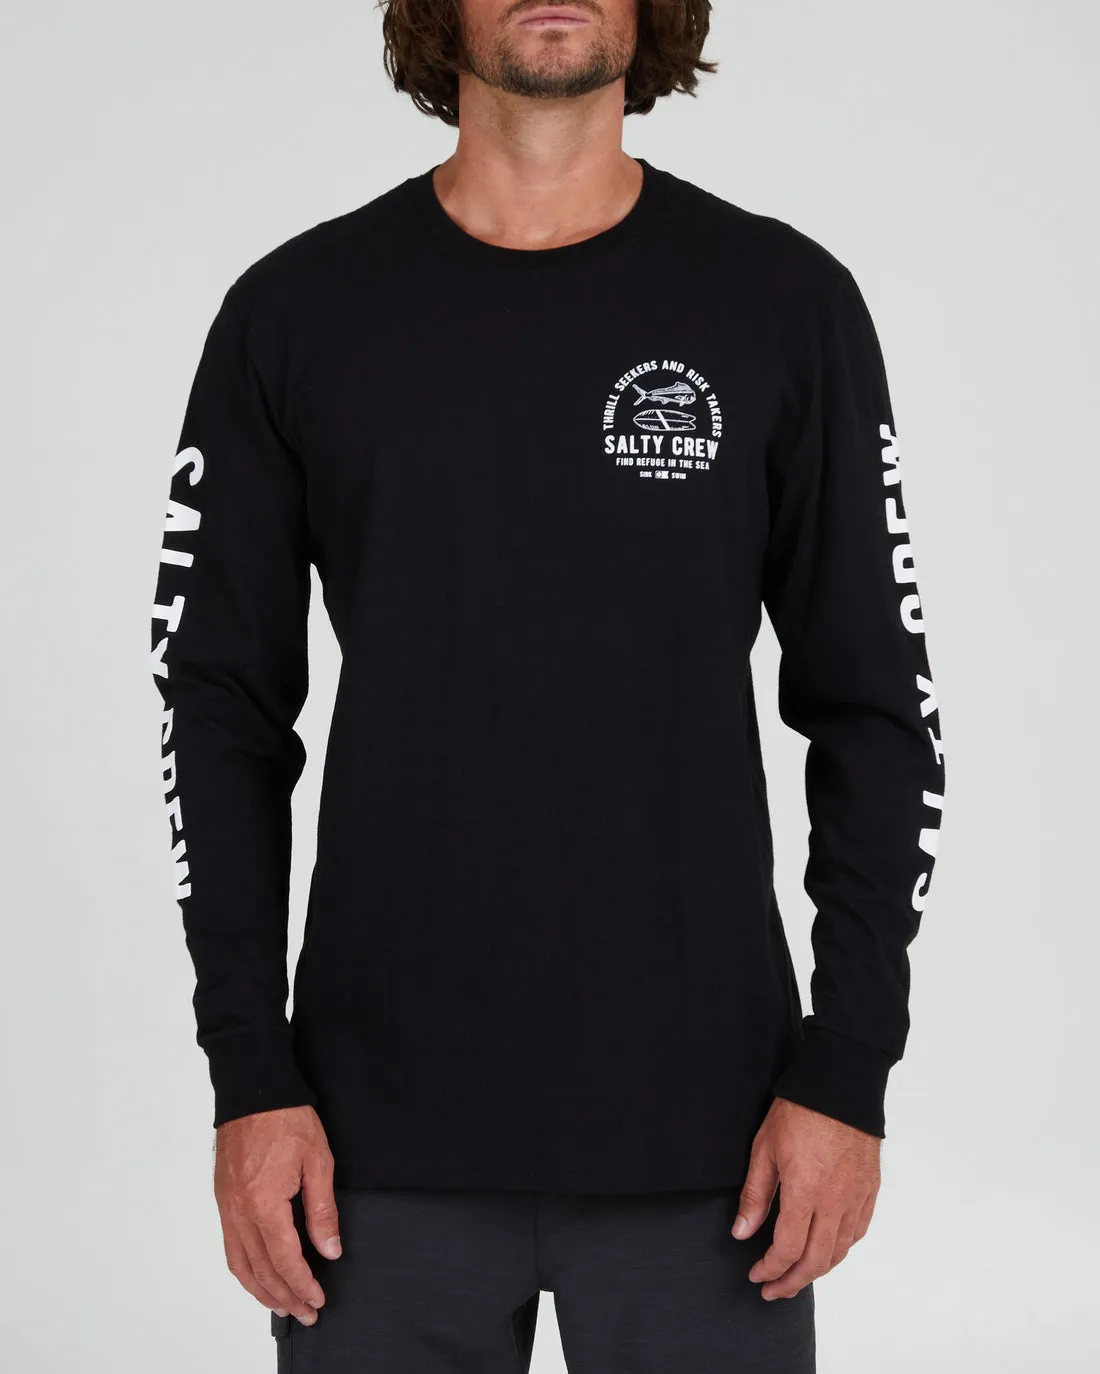 Salty crew LATERAL LINE BLACK